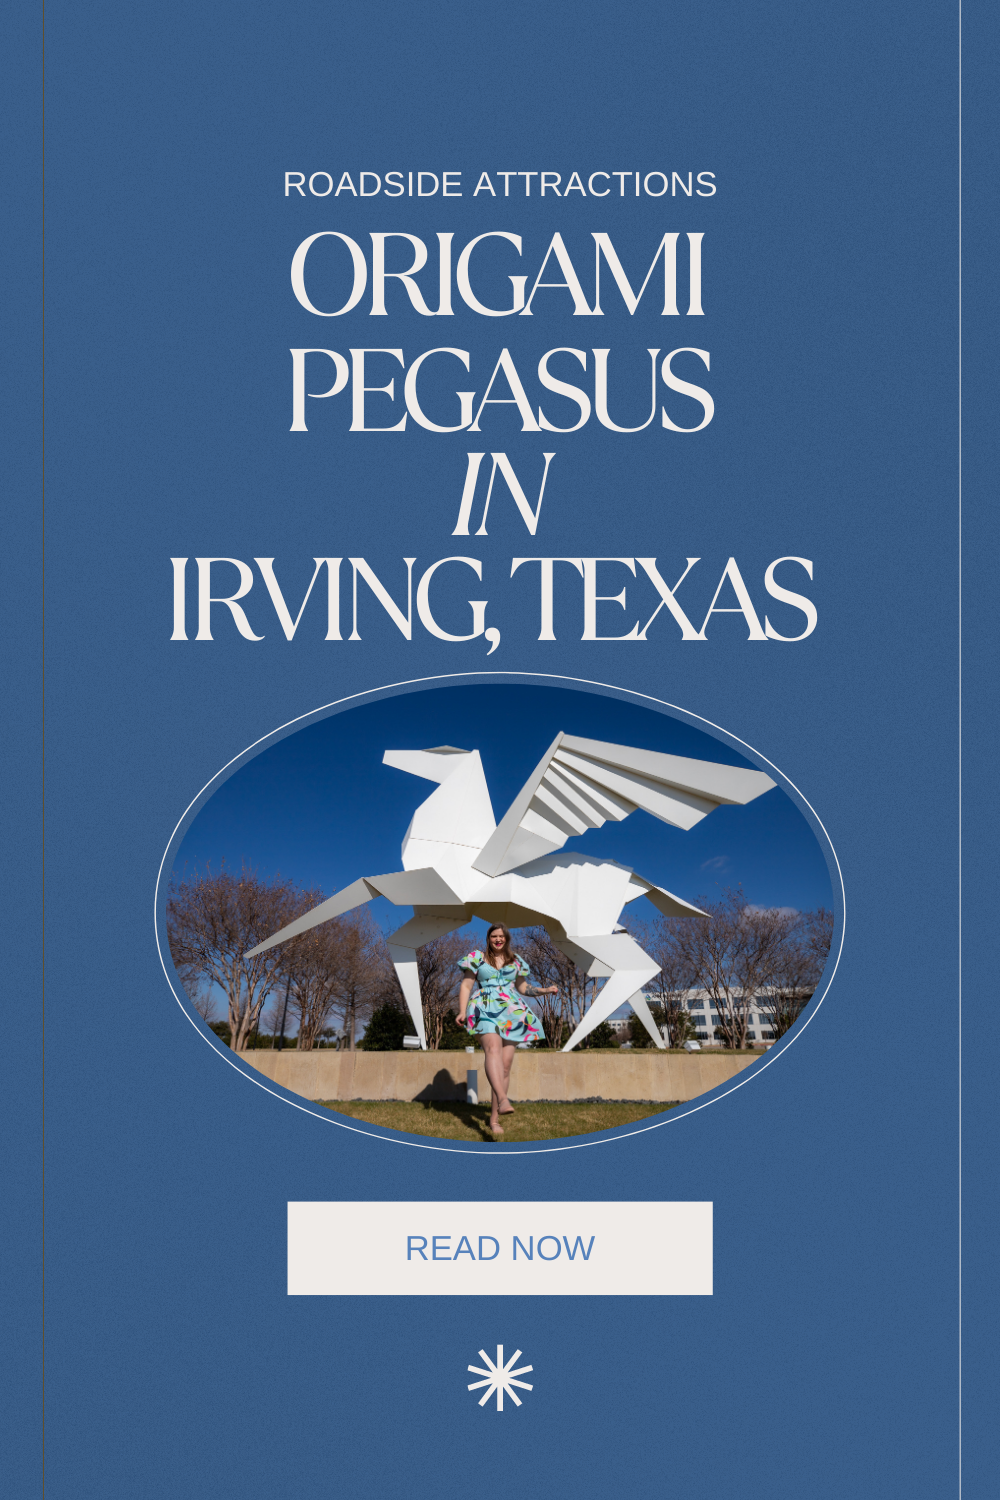 On a road trip to find the best roadside attractions in America, you never know what might unfold. But you won't have to go on a paper chase to find this one. The Origami Pegasus in Irving, Texas takes a mythical creature and an ancient art form to new heights. Visit this weird Texas roadside attraction and roadside oddity on a road trip through texas. Add it to your travel itinerary! #Texas #TexasRoadsideAttraction #RoadsideAttraction #RoadTrip #TexasRoadTrip #RoadTripItinerary